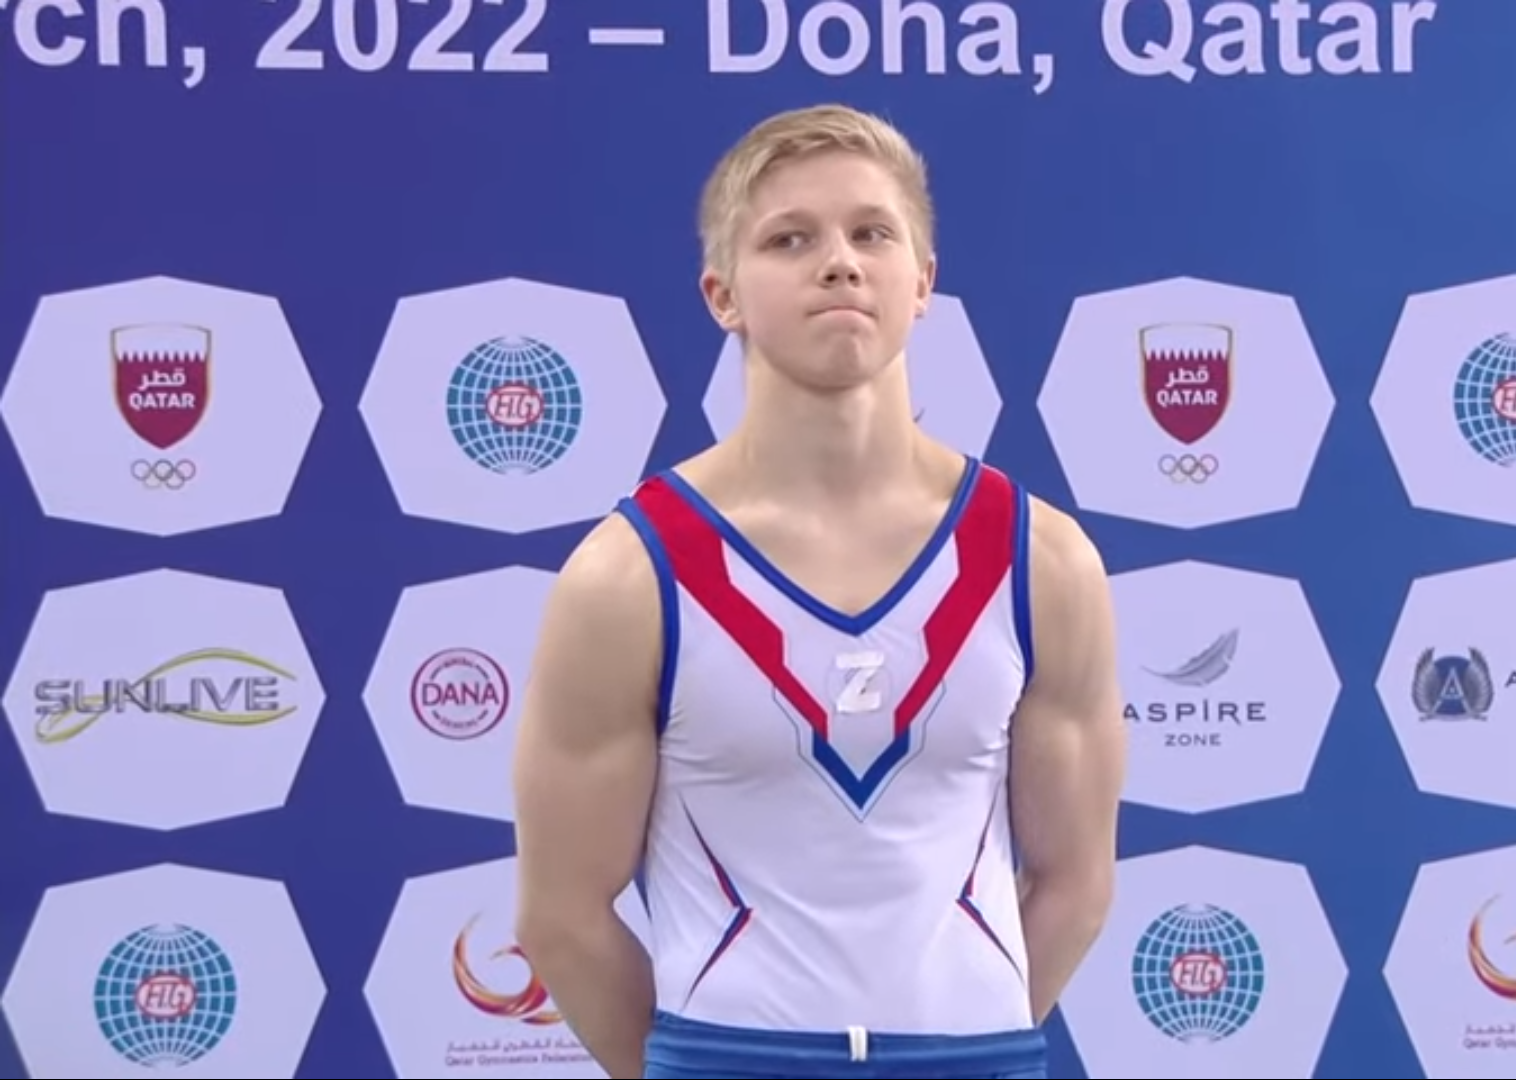 Russian coach claims Kuliak will compete at Russian Artistic Gymnastics Cup in Kaluga